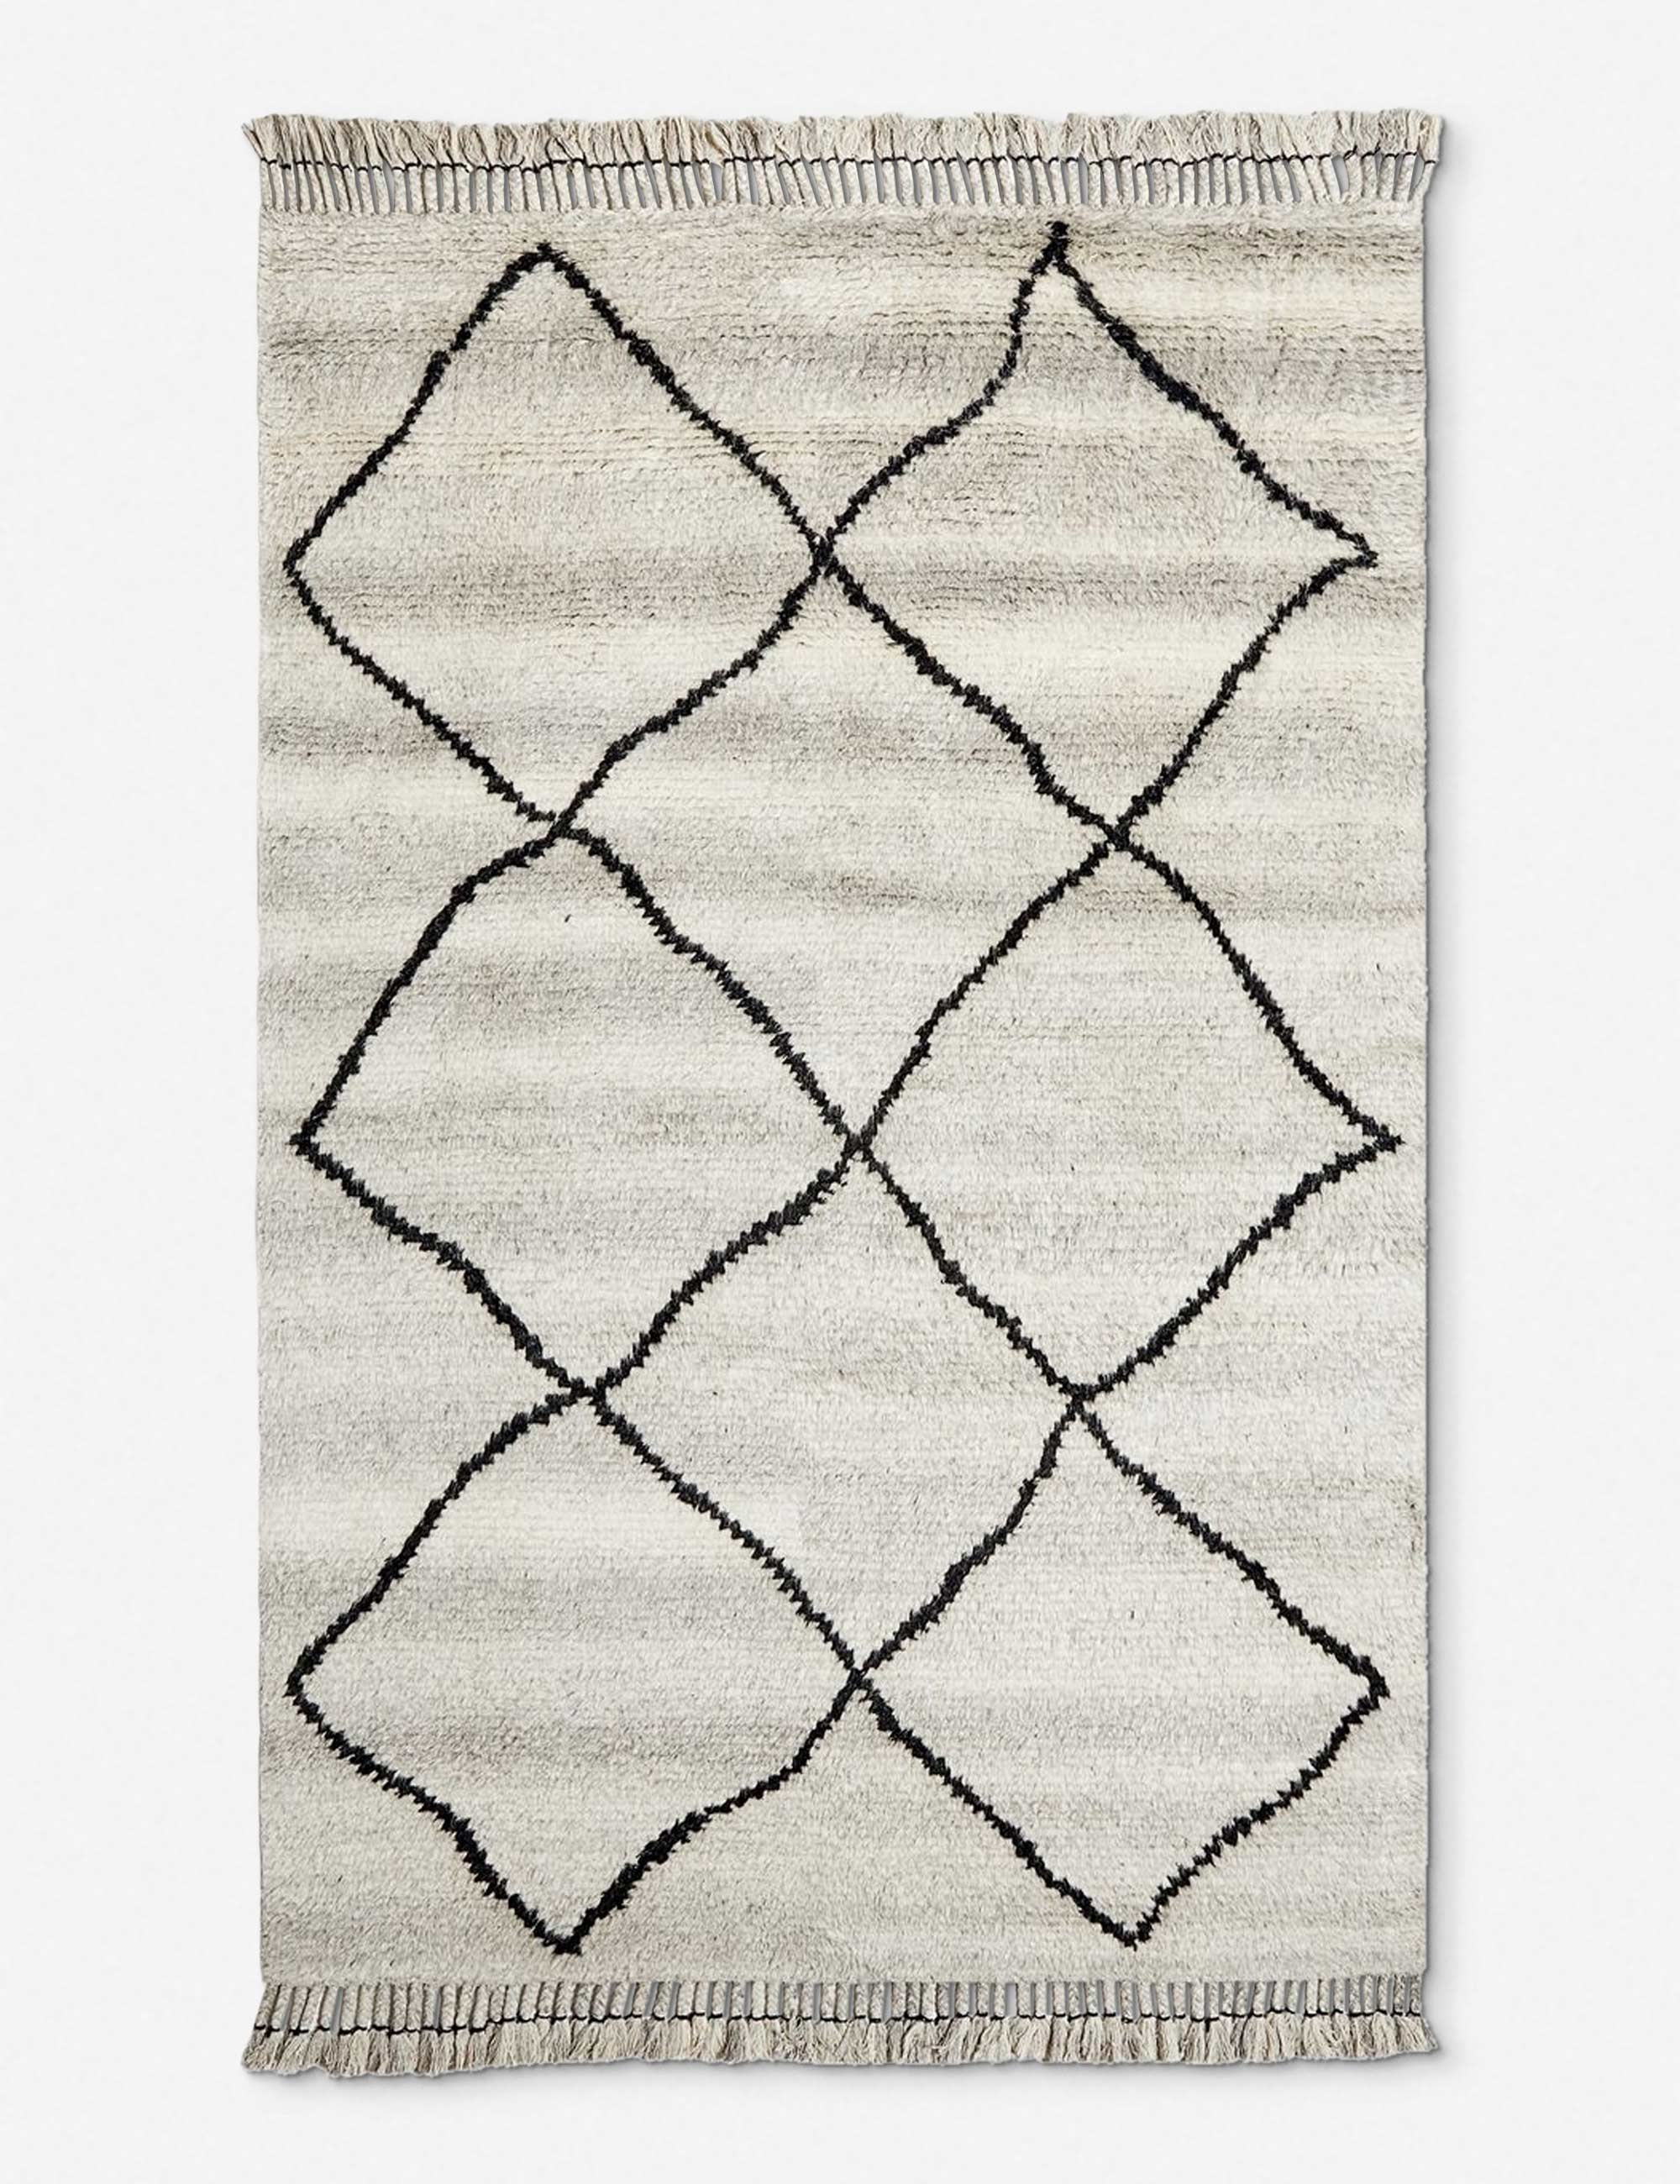 Aya Hand-Knotted Wool-Blend Moroccan Shag Rug - Image 6